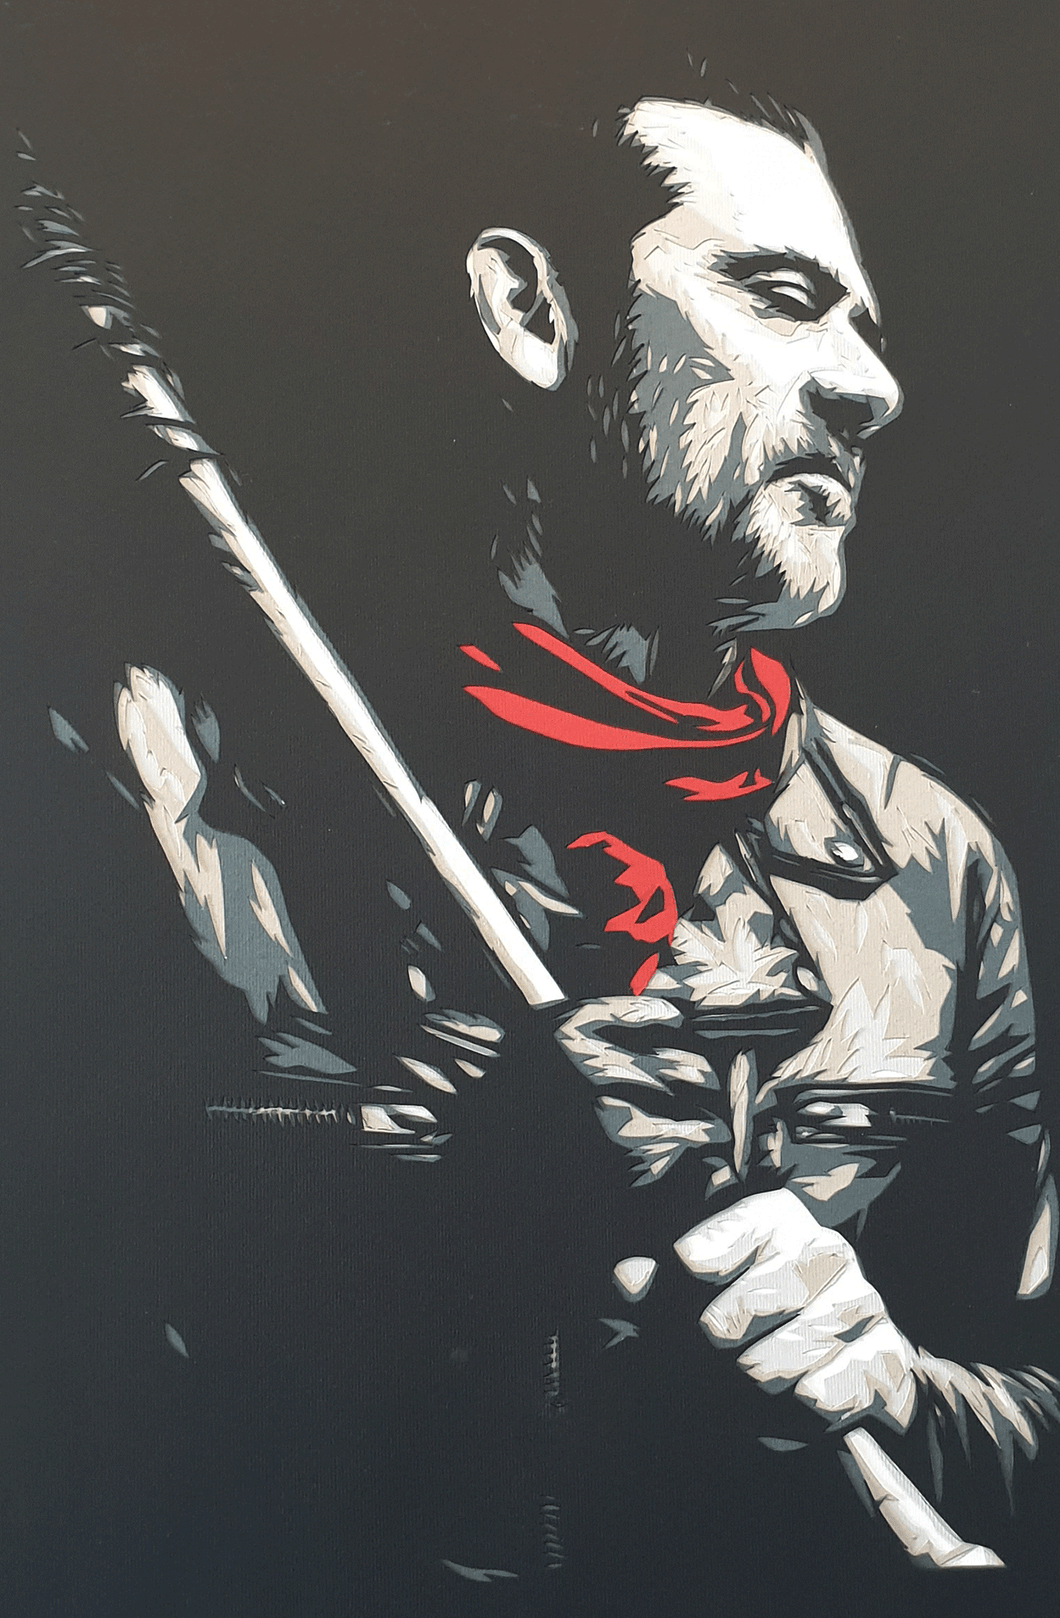 Negan and Lucille (The Walking Dead) by Rick Sharif  [A3 Size (297 x 420 mm) (11.7 x 16.5 in)]